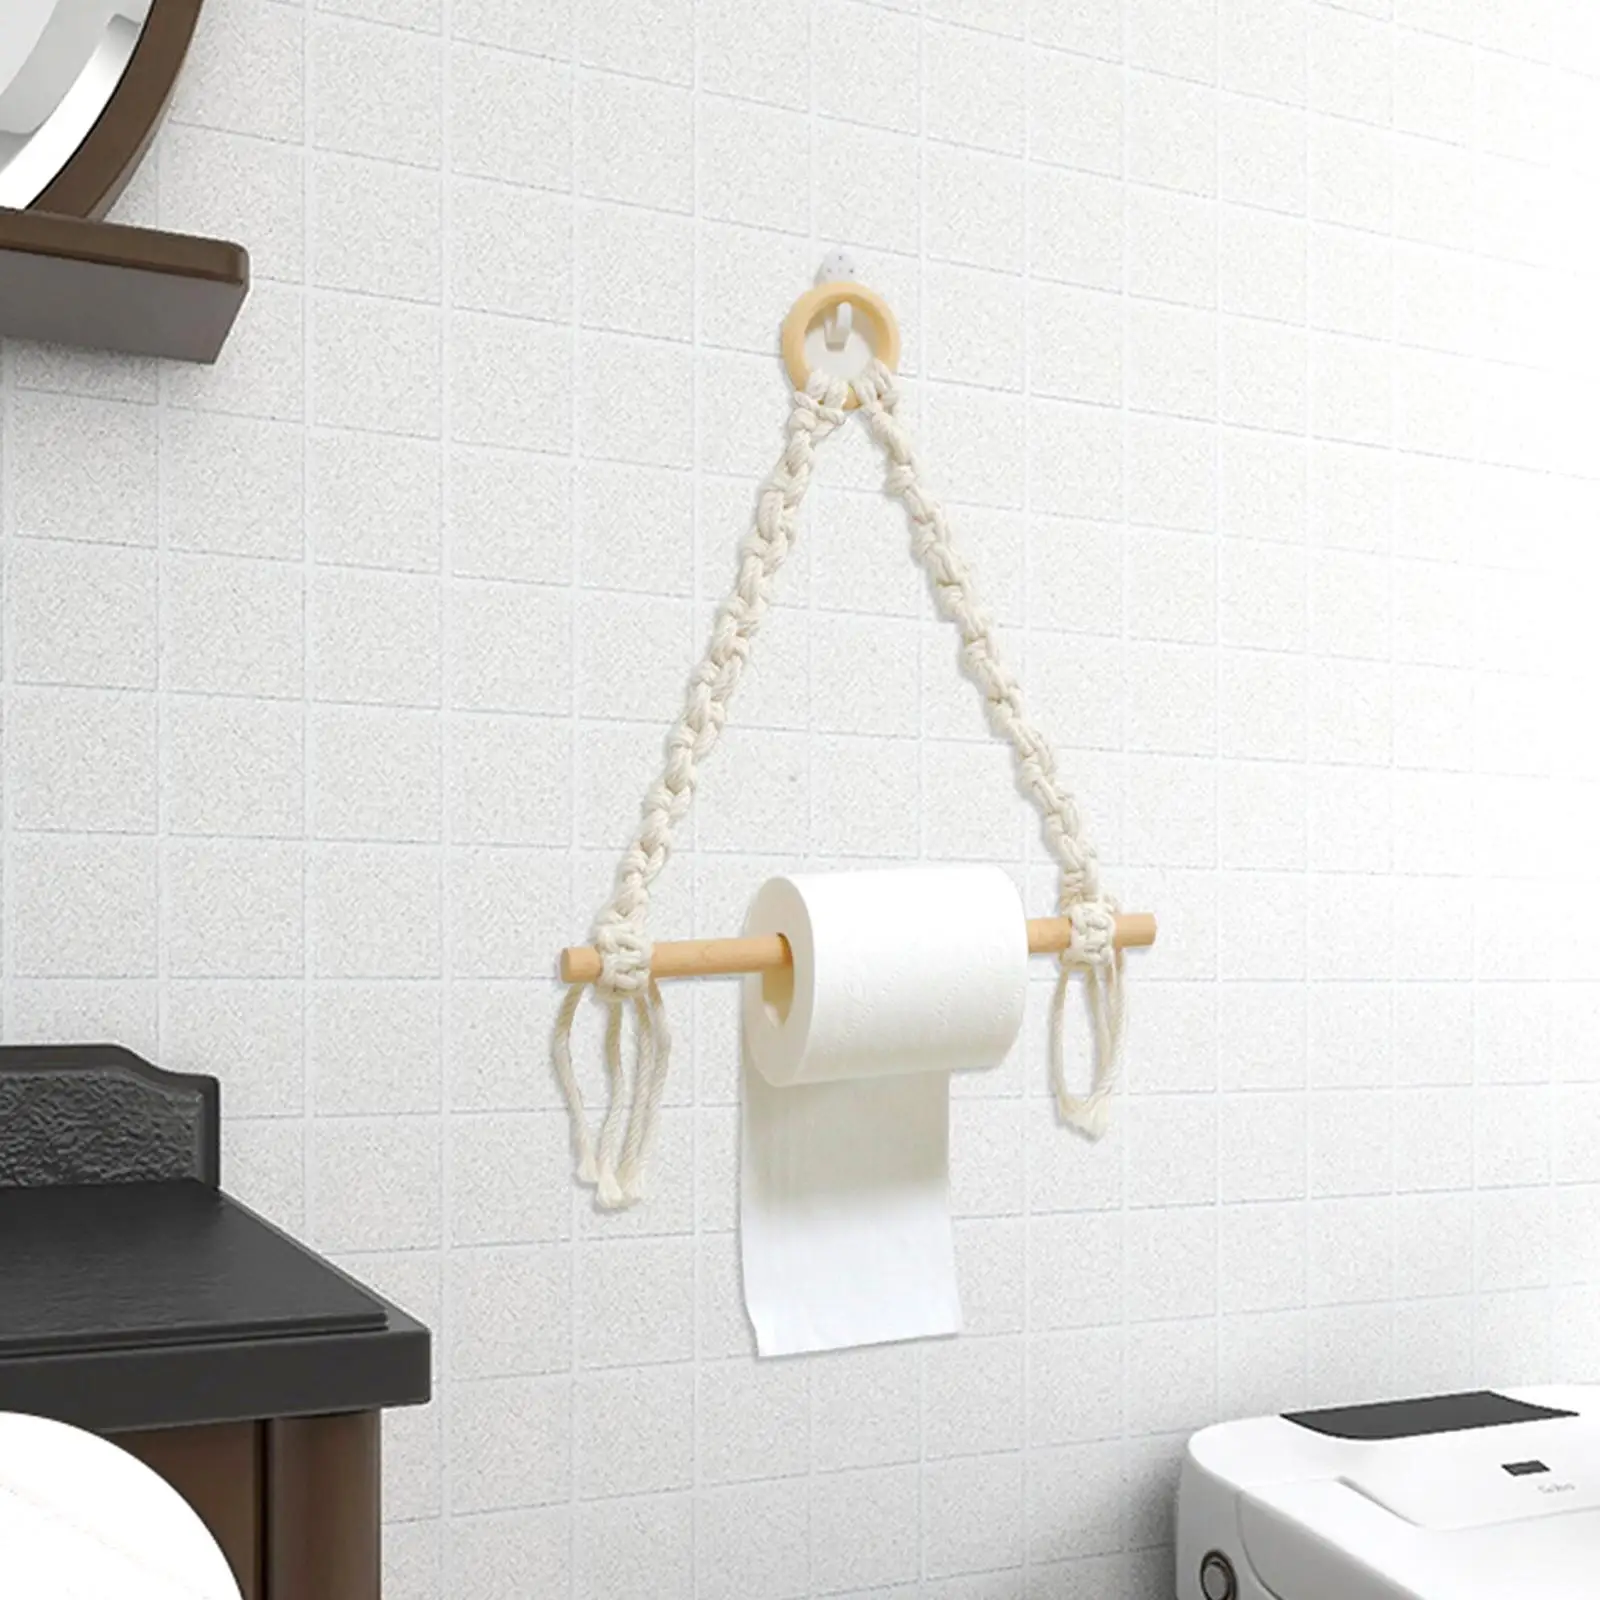 Toilet Roll Holder Decorative Toilet Decor Toilet Paper Holder Rope Wall Mount Roll Napkin Holders for Home Housewarming Closets